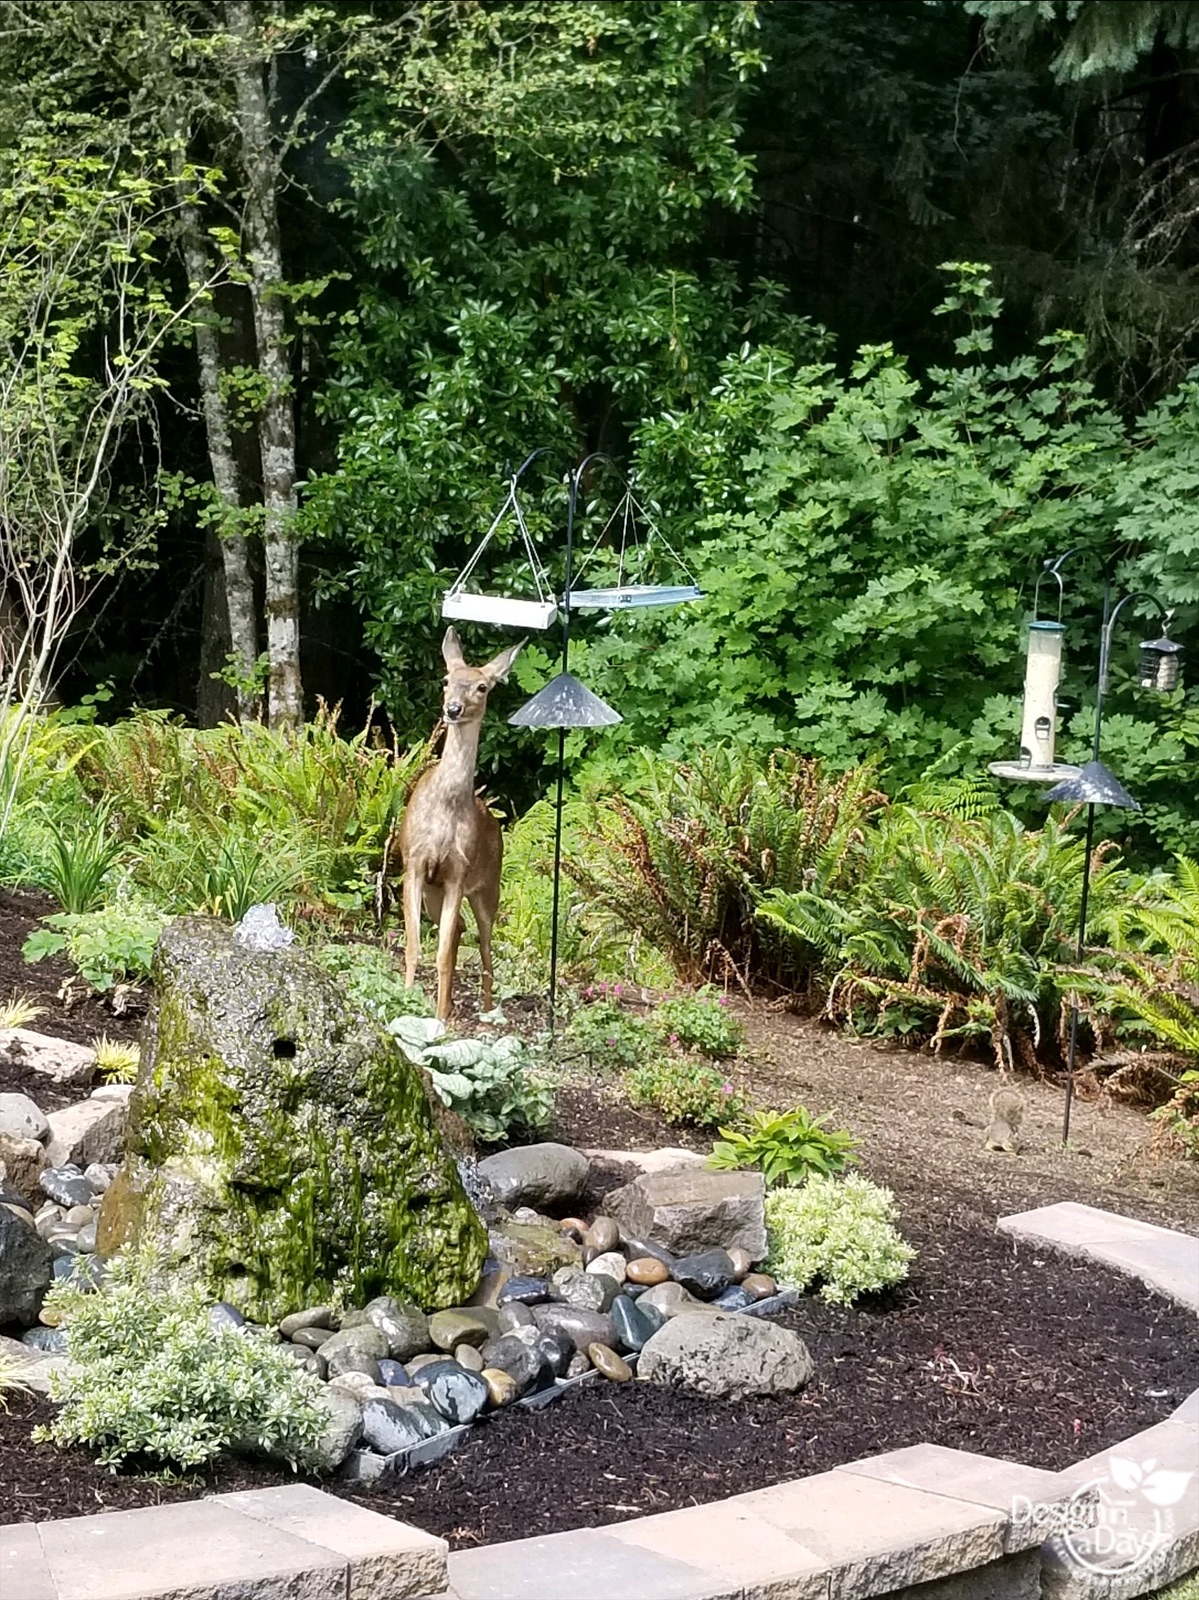 This Portland garden attracts wildlife with bird food and water.